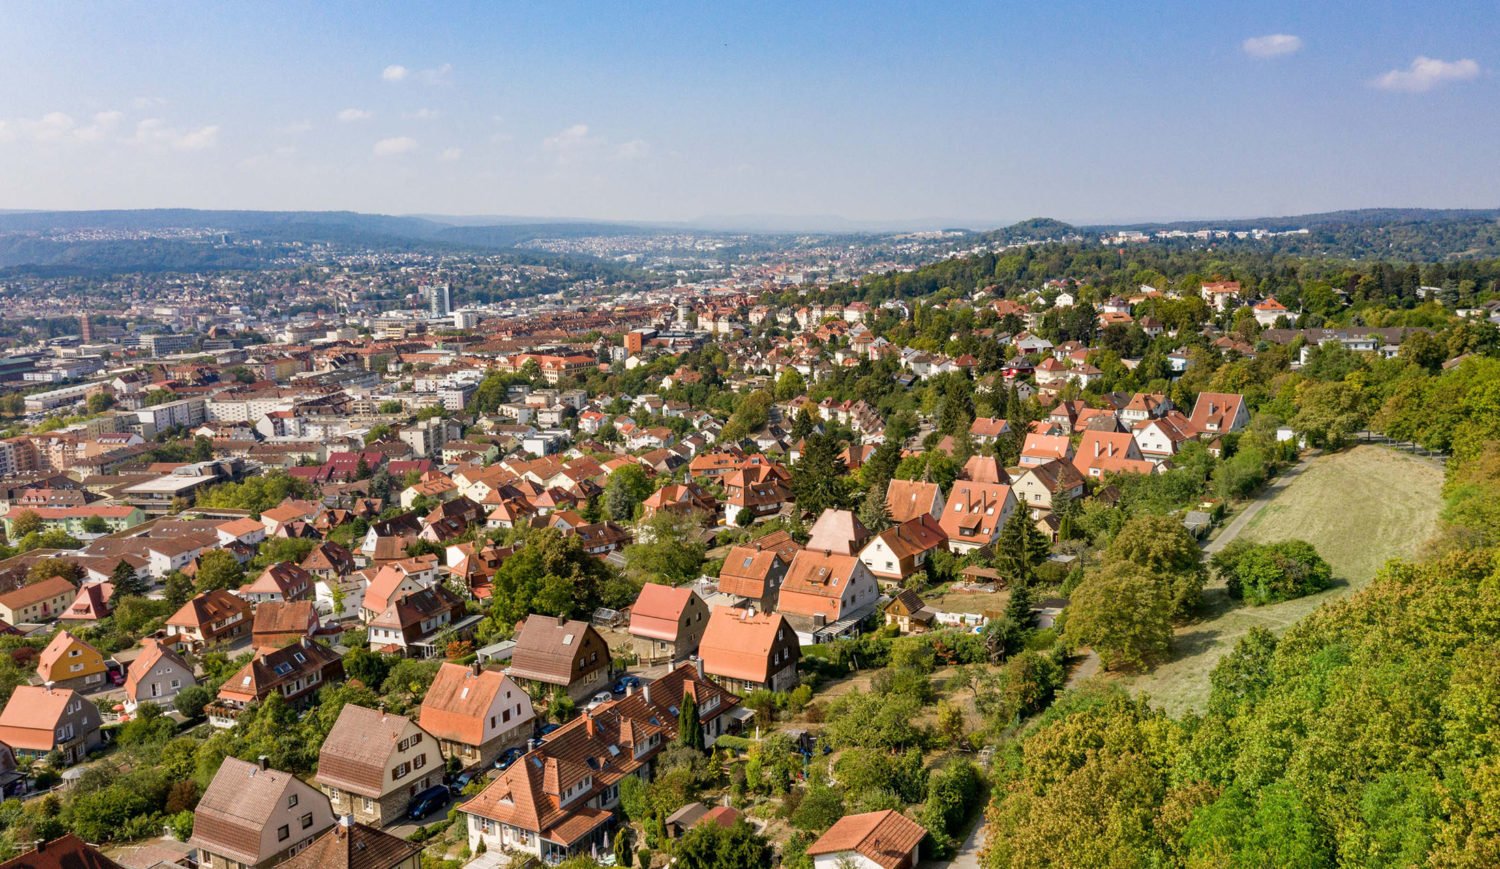 View of Pforzheim - one of the greenest cities in Germany